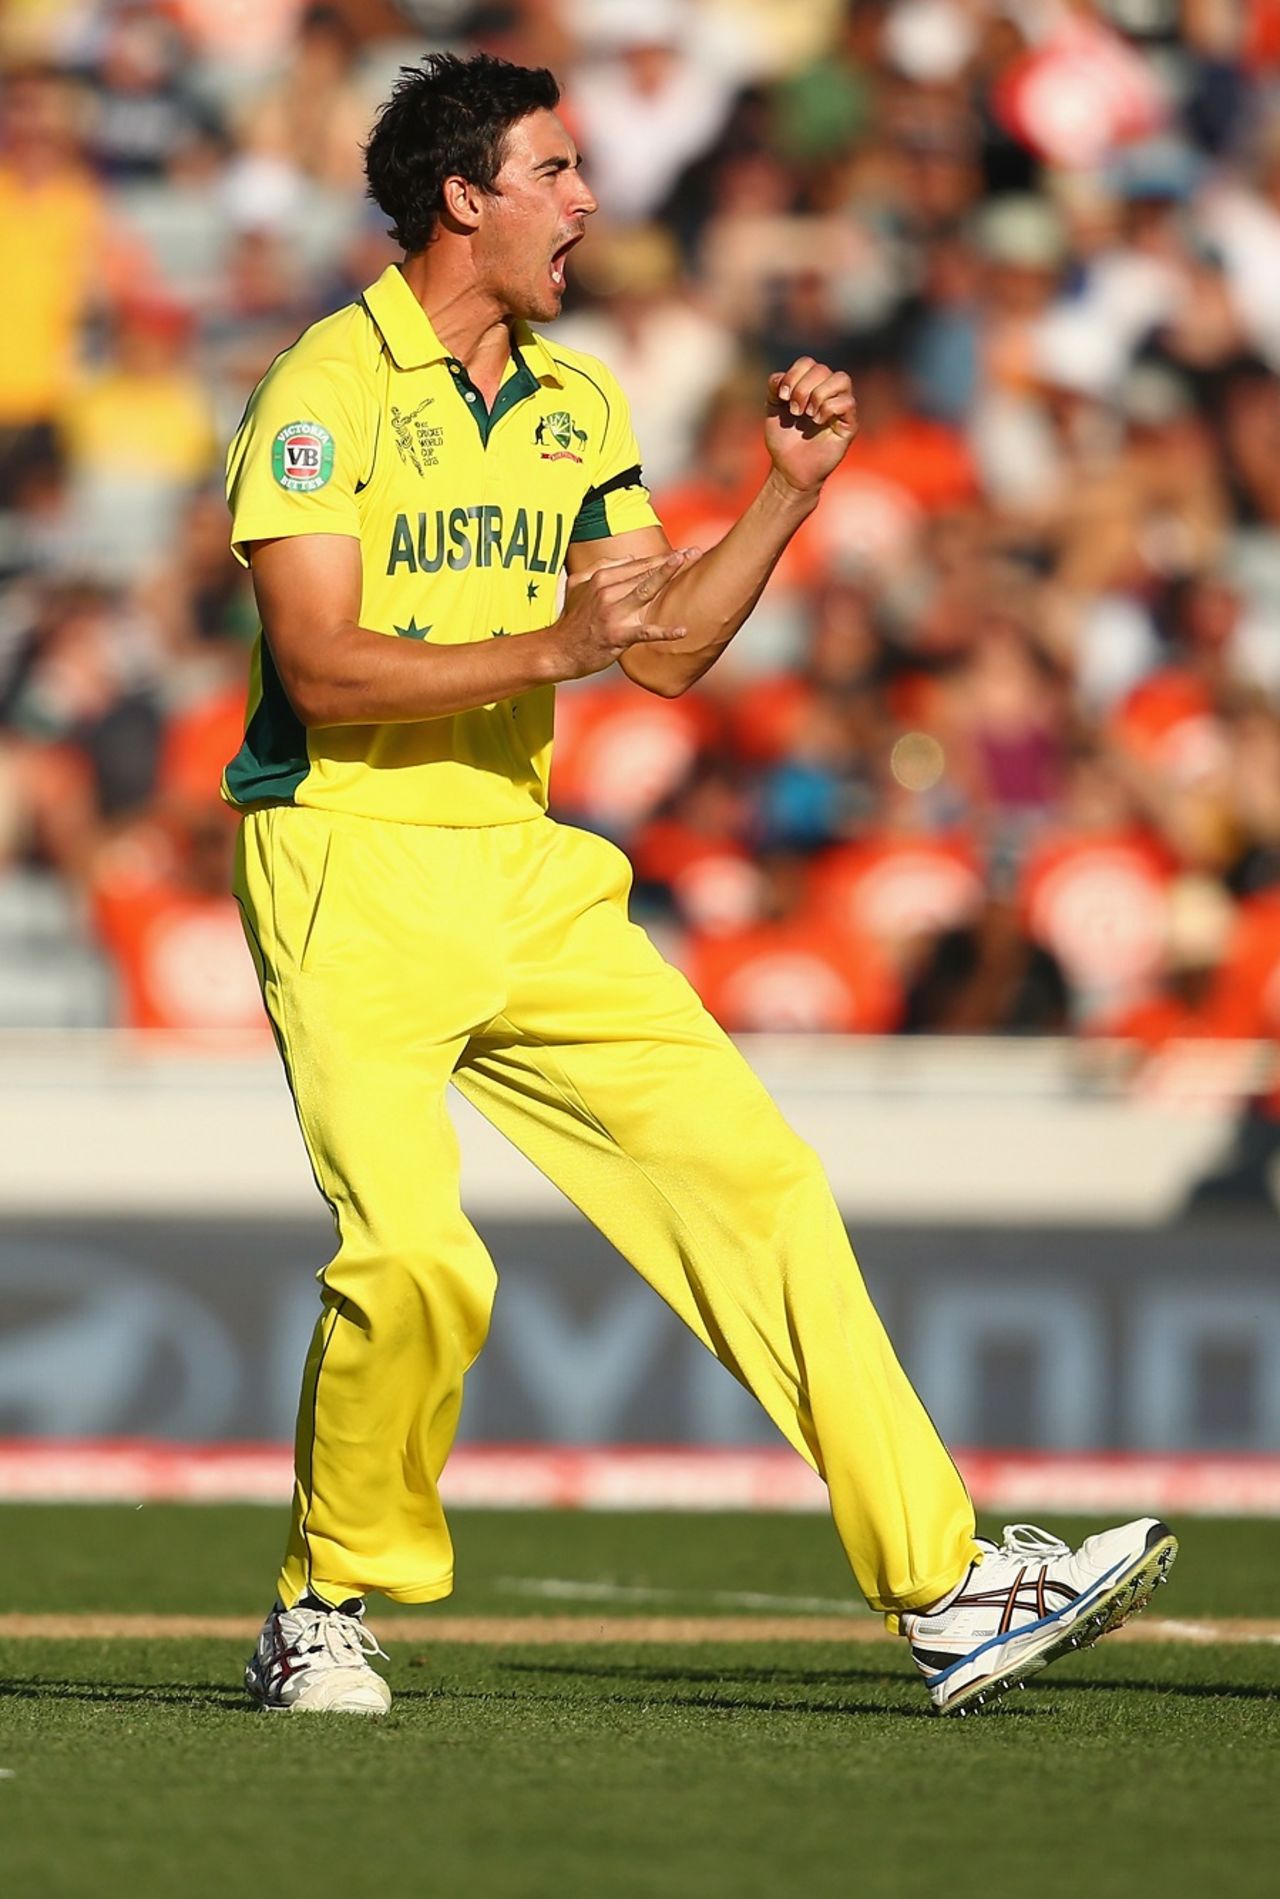 Mitchell Starc roars after taking a wicket, New Zealand v Australia, World Cup 2015, Group A, Auckland, February 28, 2015